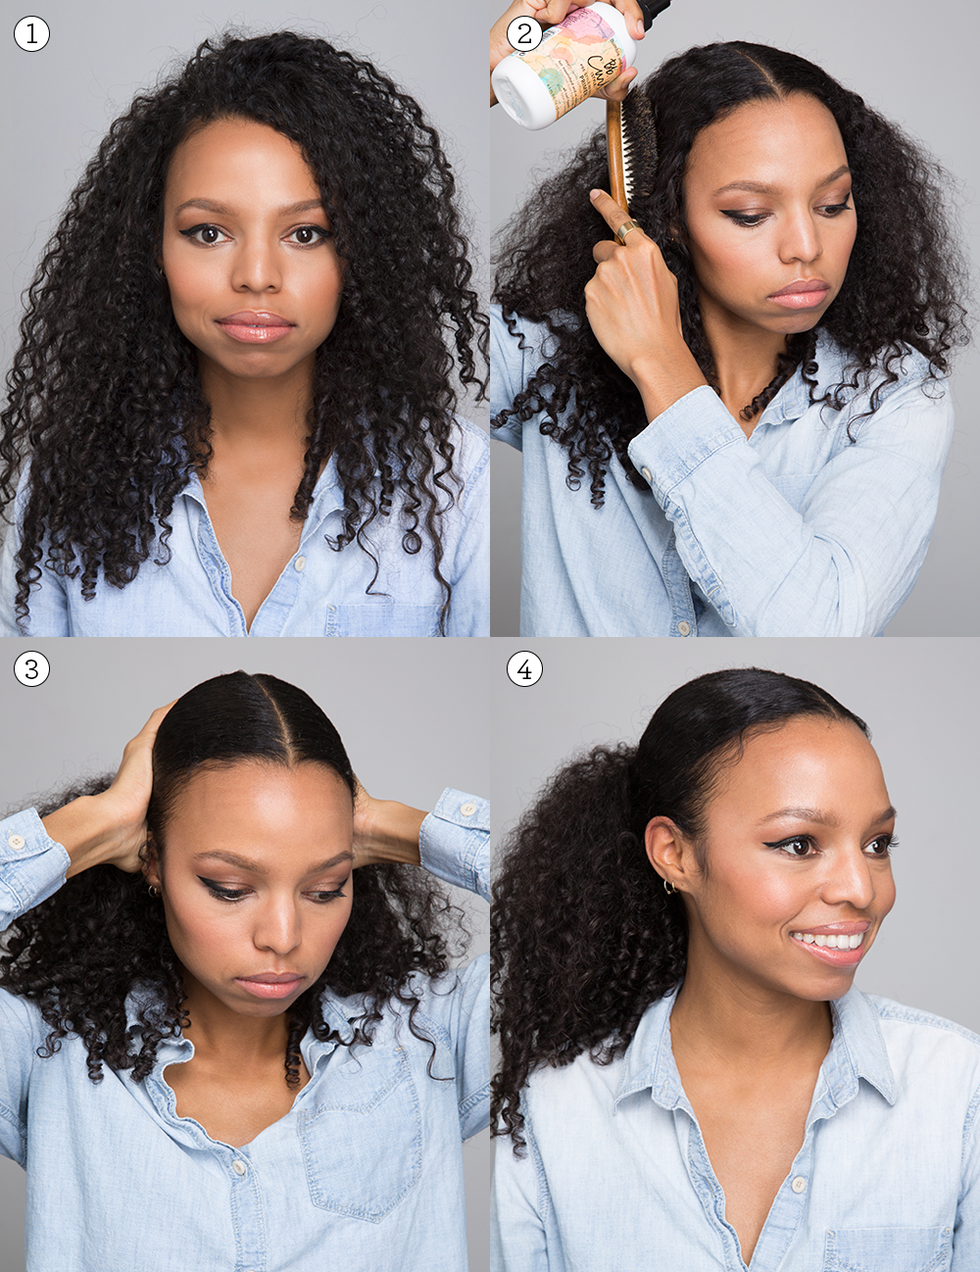 35 Short Curly Hair Styles to Try for Every Curl Pattern